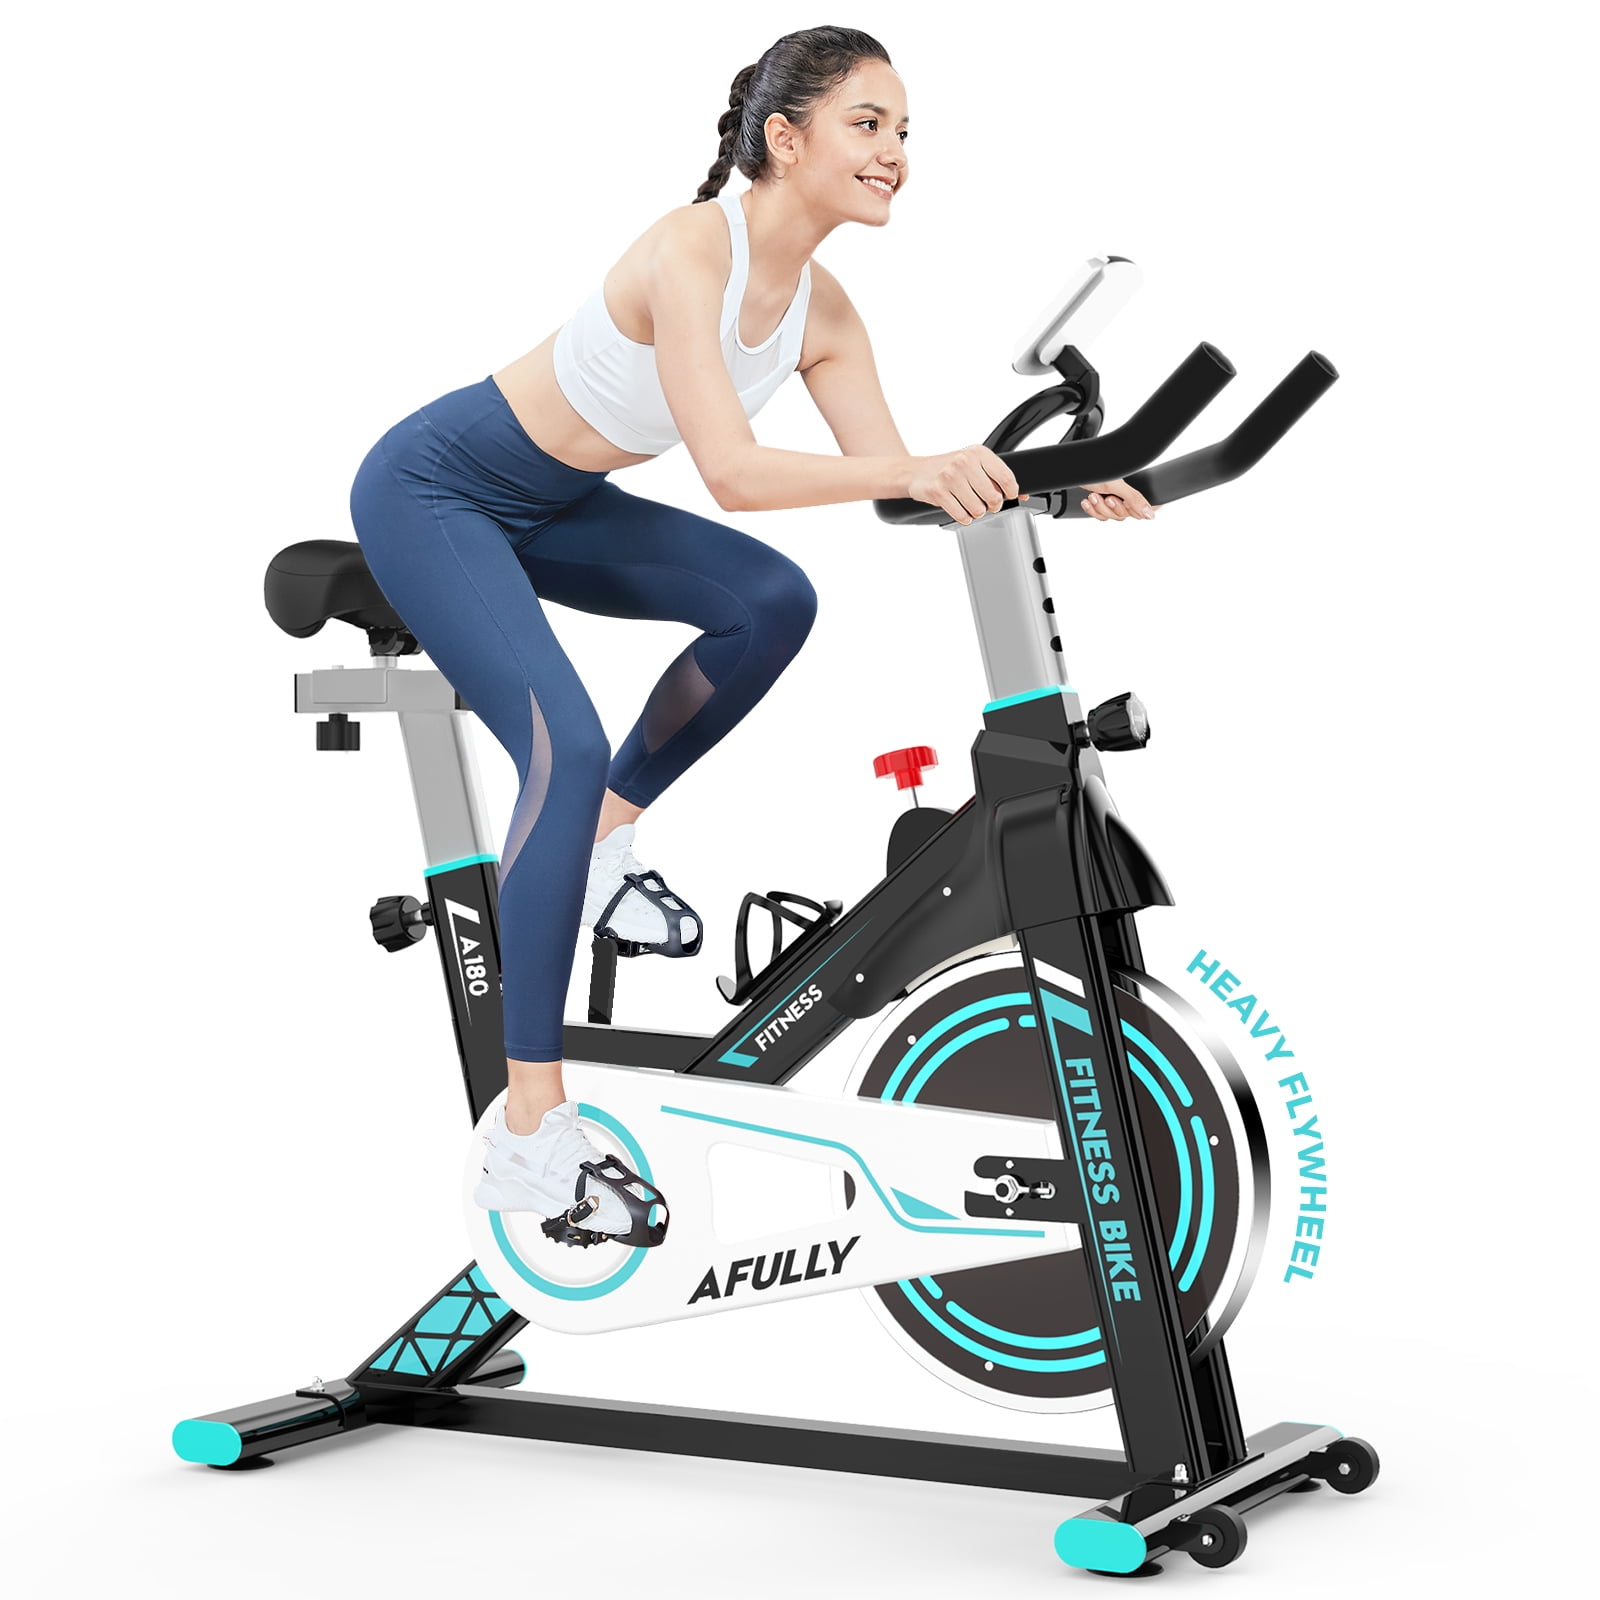 Pooboo Indoor Cycling Bike Belt Drive Exercise Bike Stationary with Comfortable Seat Cushion Tablet Holder and LCD Monitor for Home Workout 